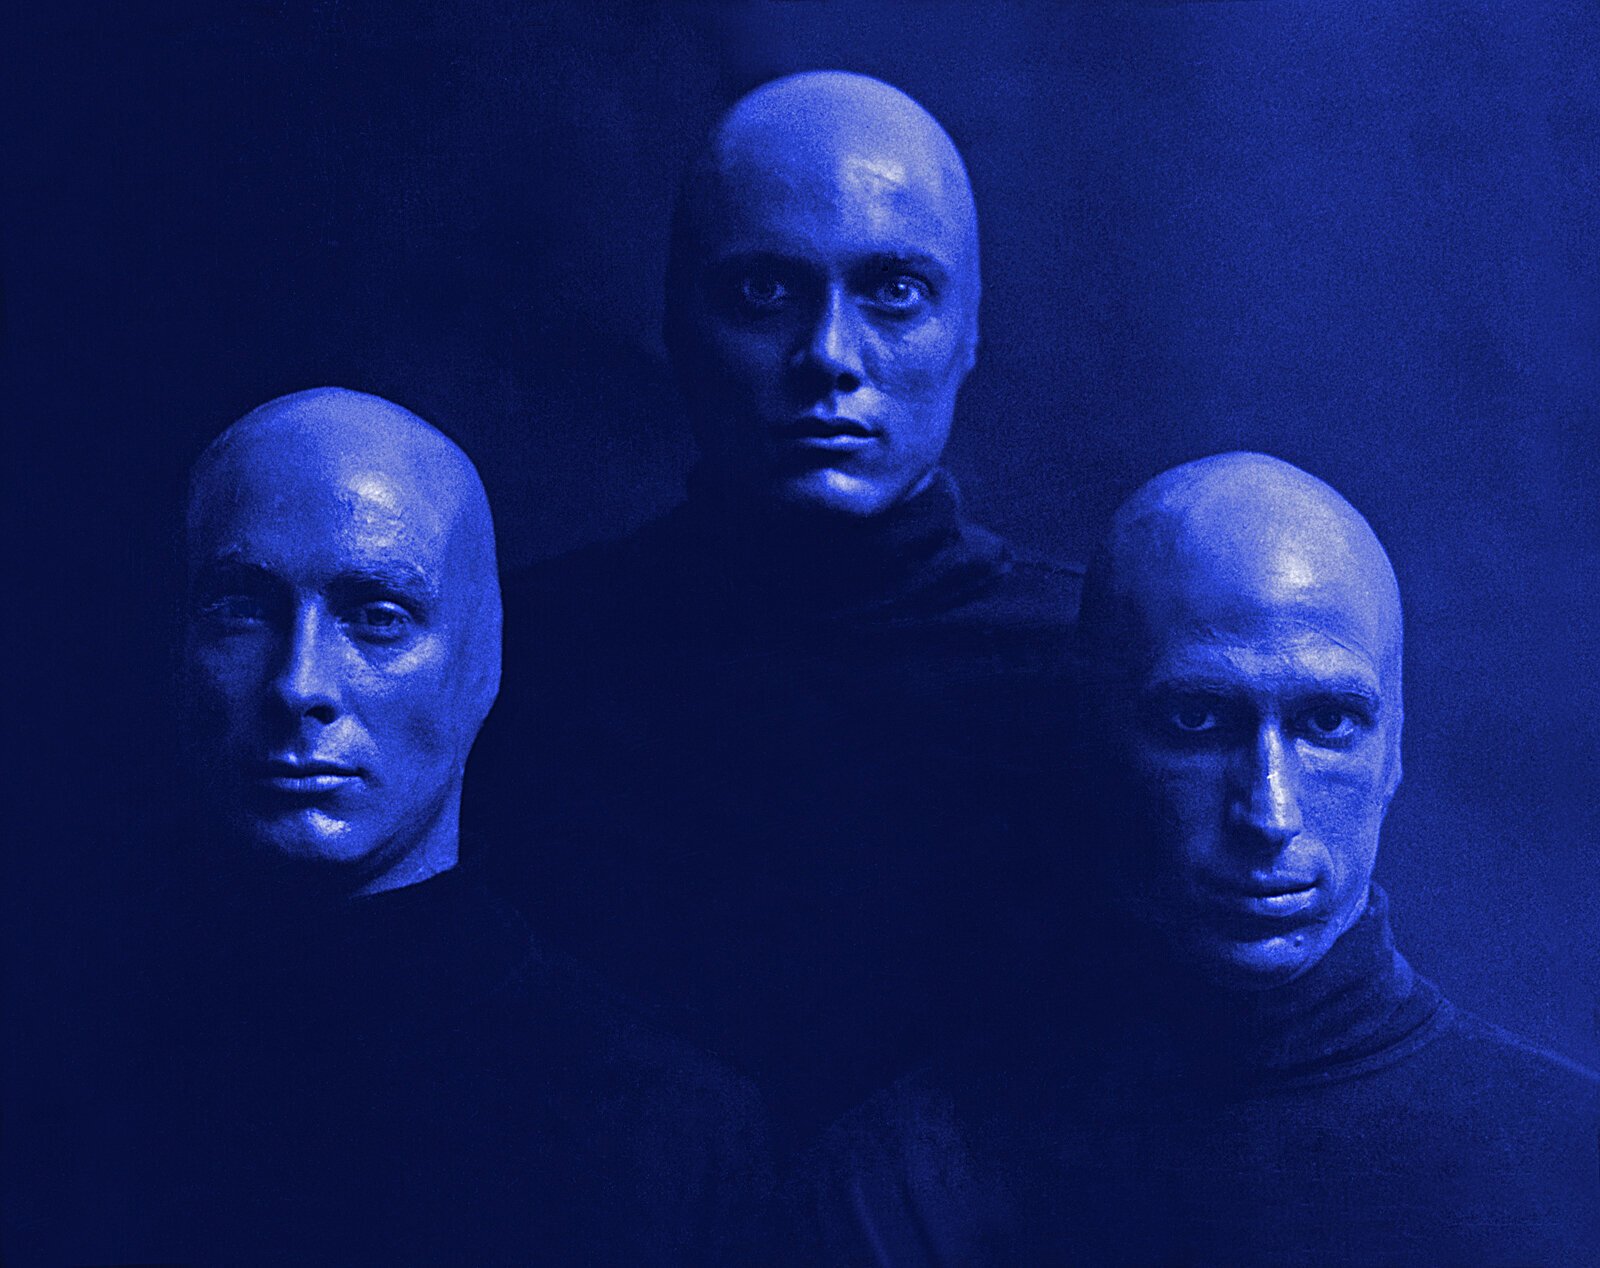  Blue Man Group - Early Photo